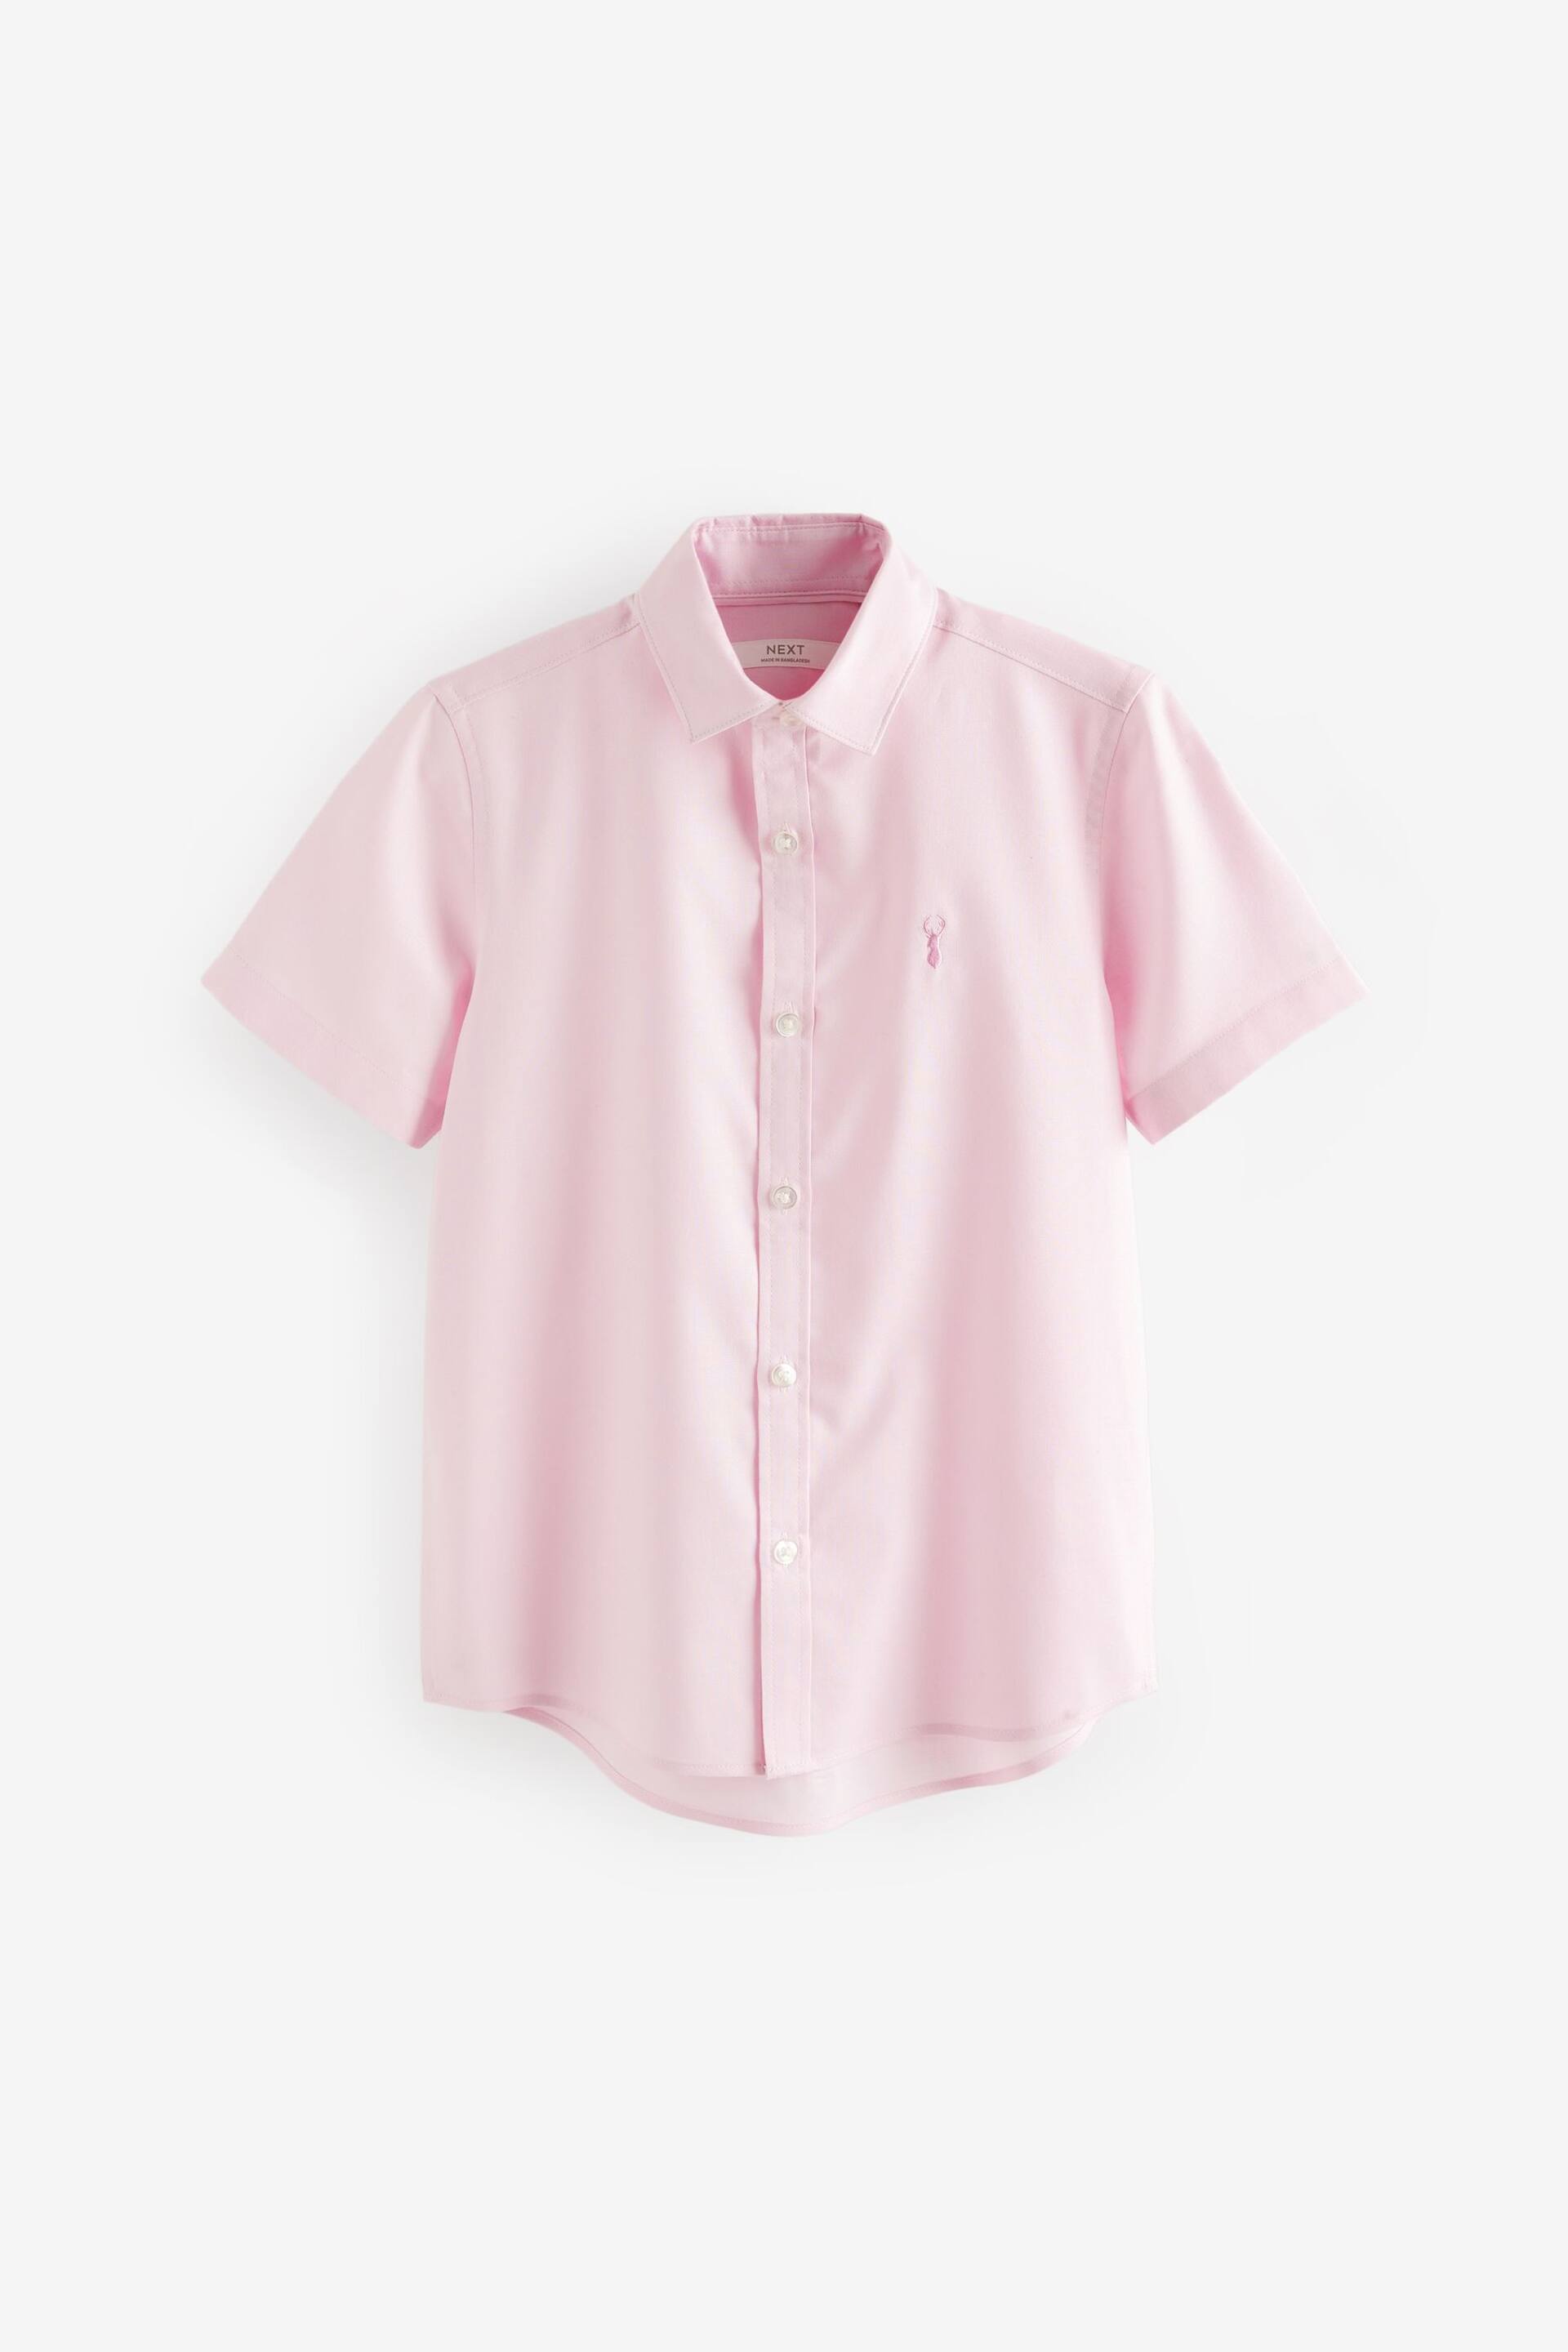 Pink Short Sleeve Cotton Rich Oxford Shirt (3-16yrs) - Image 1 of 3